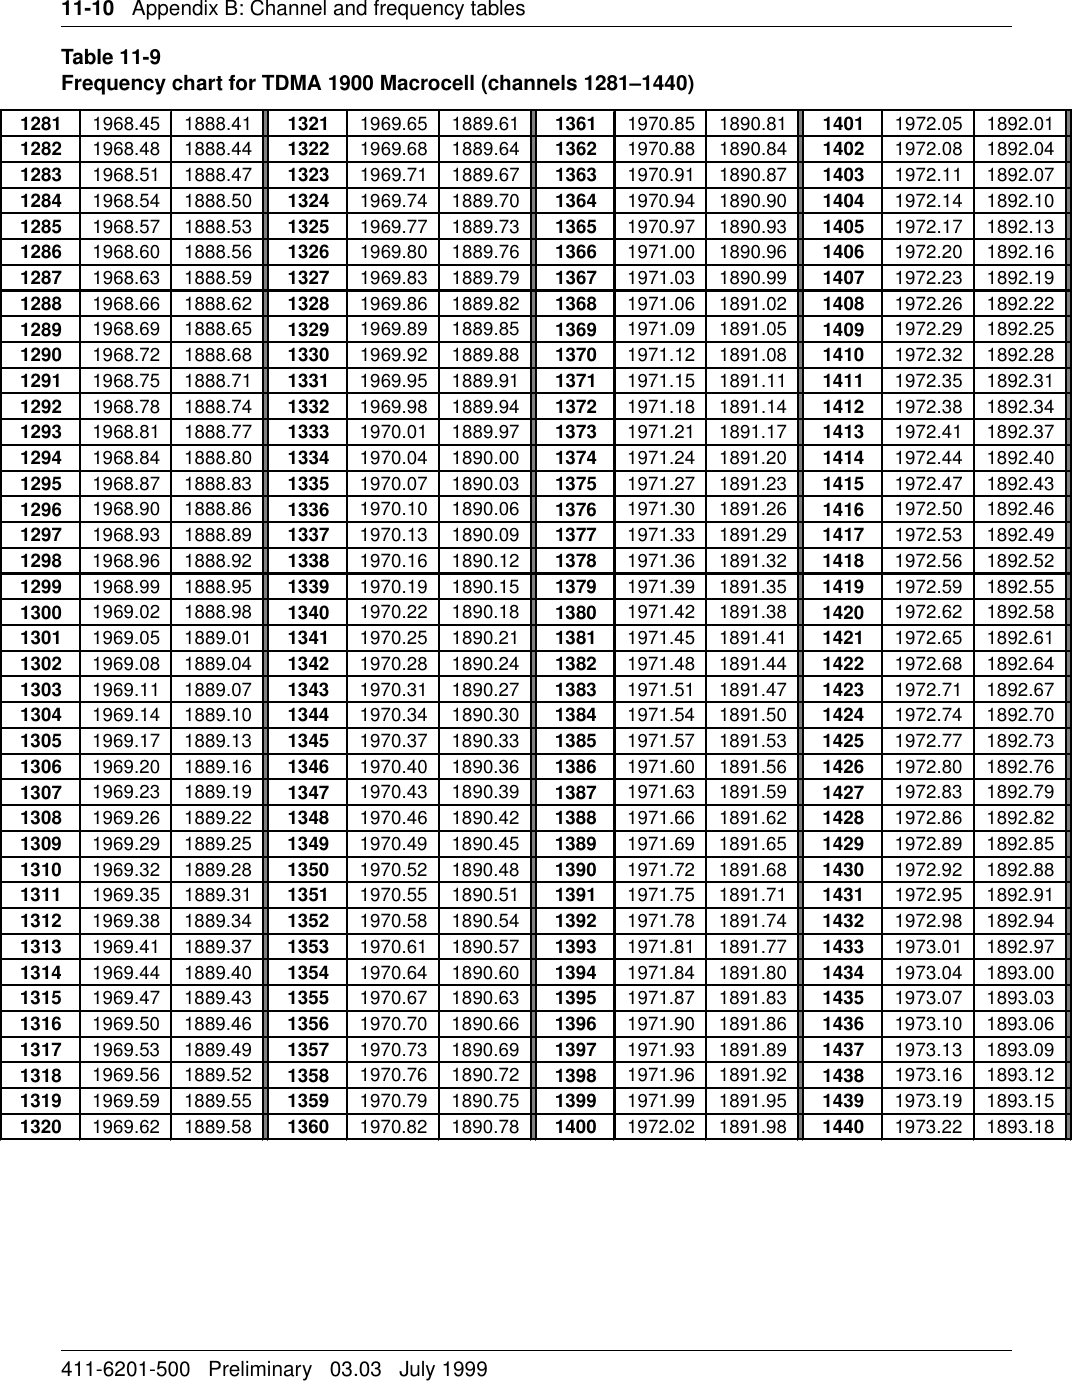 11-10   Appendix B: Channel and frequency tables411-6201-500   Preliminary   03.03   July 1999Table 11-9Frequency chart for TDMA 1900 Macrocell (channels 1281–1440)1281 1968.45 1888.41 1321 1969.65 1889.61 1361 1970.85 1890.81 1401 1972.05 1892.011282 1968.48 1888.44 1322 1969.68 1889.64 1362 1970.88 1890.84 1402 1972.08 1892.041283 1968.51 1888.47 1323 1969.71 1889.67 1363 1970.91 1890.87 1403 1972.11 1892.071284 1968.54 1888.50 1324 1969.74 1889.70 1364 1970.94 1890.90 1404 1972.14 1892.101285 1968.57 1888.53 1325 1969.77 1889.73 1365 1970.97 1890.93 1405 1972.17 1892.131286 1968.60 1888.56 1326 1969.80 1889.76 1366 1971.00 1890.96 1406 1972.20 1892.161287 1968.63 1888.59 1327 1969.83 1889.79 1367 1971.03 1890.99 1407 1972.23 1892.191288 1968.66 1888.62 1328 1969.86 1889.82 1368 1971.06 1891.02 1408 1972.26 1892.221289 1968.69 1888.65 1329 1969.89 1889.85 1369 1971.09 1891.05 1409 1972.29 1892.251290 1968.72 1888.68 1330 1969.92 1889.88 1370 1971.12 1891.08 1410 1972.32 1892.281291 1968.75 1888.71 1331 1969.95 1889.91 1371 1971.15 1891.11 1411 1972.35 1892.311292 1968.78 1888.74 1332 1969.98 1889.94 1372 1971.18 1891.14 1412 1972.38 1892.341293 1968.81 1888.77 1333 1970.01 1889.97 1373 1971.21 1891.17 1413 1972.41 1892.371294 1968.84 1888.80 1334 1970.04 1890.00 1374 1971.24 1891.20 1414 1972.44 1892.401295 1968.87 1888.83 1335 1970.07 1890.03 1375 1971.27 1891.23 1415 1972.47 1892.431296 1968.90 1888.86 1336 1970.10 1890.06 1376 1971.30 1891.26 1416 1972.50 1892.461297 1968.93 1888.89 1337 1970.13 1890.09 1377 1971.33 1891.29 1417 1972.53 1892.491298 1968.96 1888.92 1338 1970.16 1890.12 1378 1971.36 1891.32 1418 1972.56 1892.521299 1968.99 1888.95 1339 1970.19 1890.15 1379 1971.39 1891.35 1419 1972.59 1892.551300 1969.02 1888.98 1340 1970.22 1890.18 1380 1971.42 1891.38 1420 1972.62 1892.581301 1969.05 1889.01 1341 1970.25 1890.21 1381 1971.45 1891.41 1421 1972.65 1892.611302 1969.08 1889.04 1342 1970.28 1890.24 1382 1971.48 1891.44 1422 1972.68 1892.641303 1969.11 1889.07 1343 1970.31 1890.27 1383 1971.51 1891.47 1423 1972.71 1892.671304 1969.14 1889.10 1344 1970.34 1890.30 1384 1971.54 1891.50 1424 1972.74 1892.701305 1969.17 1889.13 1345 1970.37 1890.33 1385 1971.57 1891.53 1425 1972.77 1892.731306 1969.20 1889.16 1346 1970.40 1890.36 1386 1971.60 1891.56 1426 1972.80 1892.761307 1969.23 1889.19 1347 1970.43 1890.39 1387 1971.63 1891.59 1427 1972.83 1892.791308 1969.26 1889.22 1348 1970.46 1890.42 1388 1971.66 1891.62 1428 1972.86 1892.821309 1969.29 1889.25 1349 1970.49 1890.45 1389 1971.69 1891.65 1429 1972.89 1892.851310 1969.32 1889.28 1350 1970.52 1890.48 1390 1971.72 1891.68 1430 1972.92 1892.881311 1969.35 1889.31 1351 1970.55 1890.51 1391 1971.75 1891.71 1431 1972.95 1892.911312 1969.38 1889.34 1352 1970.58 1890.54 1392 1971.78 1891.74 1432 1972.98 1892.941313 1969.41 1889.37 1353 1970.61 1890.57 1393 1971.81 1891.77 1433 1973.01 1892.971314 1969.44 1889.40 1354 1970.64 1890.60 1394 1971.84 1891.80 1434 1973.04 1893.001315 1969.47 1889.43 1355 1970.67 1890.63 1395 1971.87 1891.83 1435 1973.07 1893.031316 1969.50 1889.46 1356 1970.70 1890.66 1396 1971.90 1891.86 1436 1973.10 1893.061317 1969.53 1889.49 1357 1970.73 1890.69 1397 1971.93 1891.89 1437 1973.13 1893.091318 1969.56 1889.52 1358 1970.76 1890.72 1398 1971.96 1891.92 1438 1973.16 1893.121319 1969.59 1889.55 1359 1970.79 1890.75 1399 1971.99 1891.95 1439 1973.19 1893.151320 1969.62 1889.58 1360 1970.82 1890.78 1400 1972.02 1891.98 1440 1973.22 1893.18